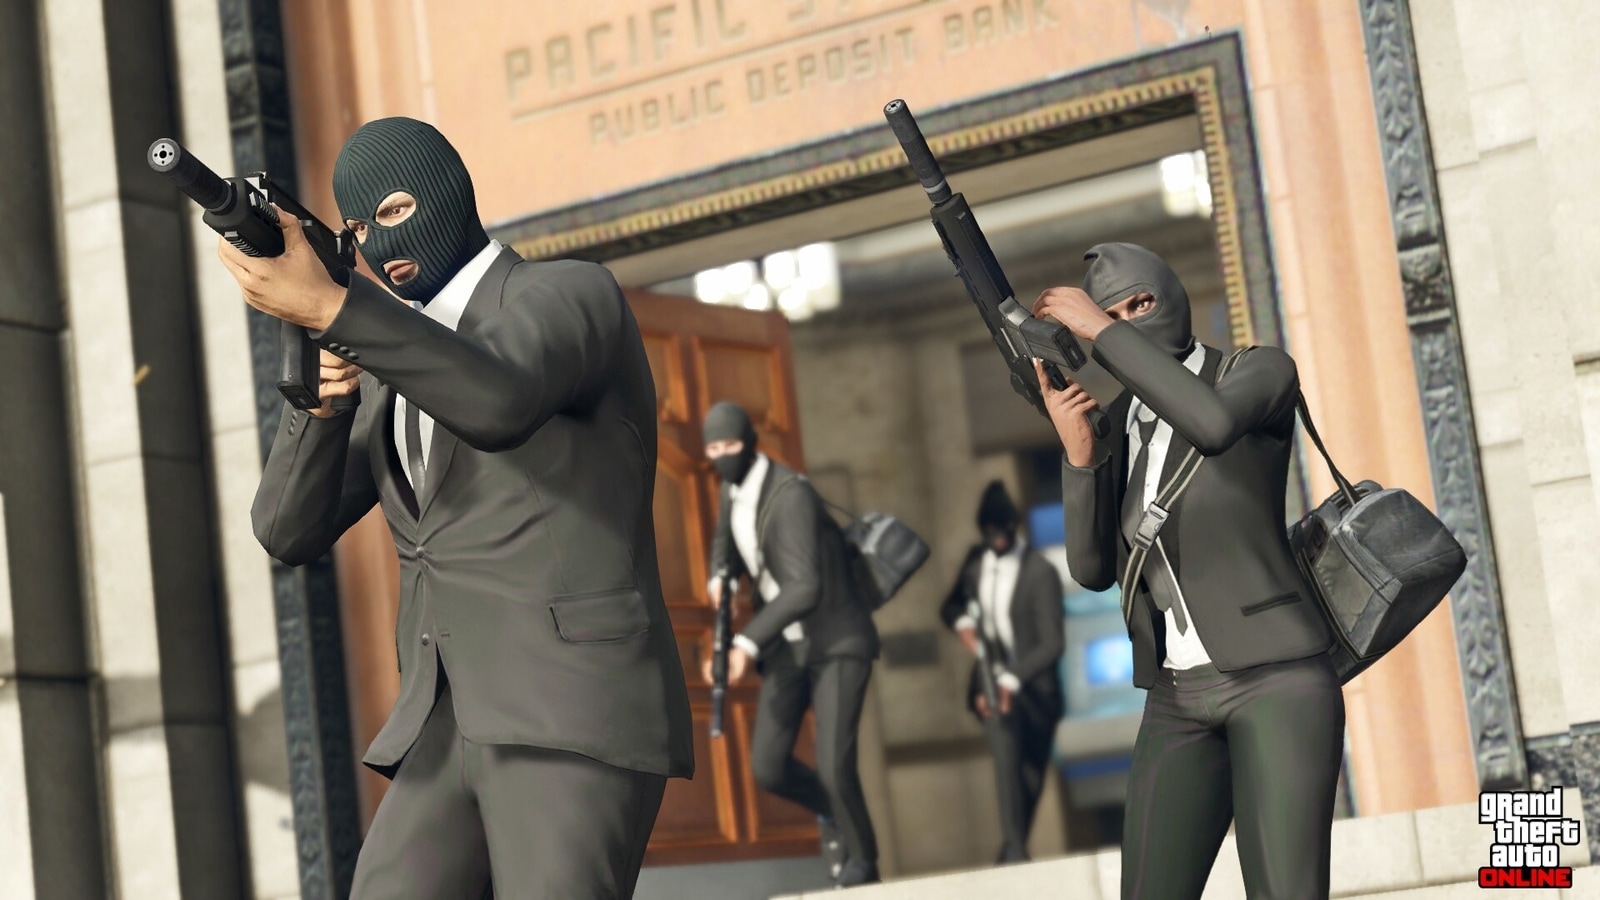 Want to Play GTA 5 For FREE? DO THIS! 